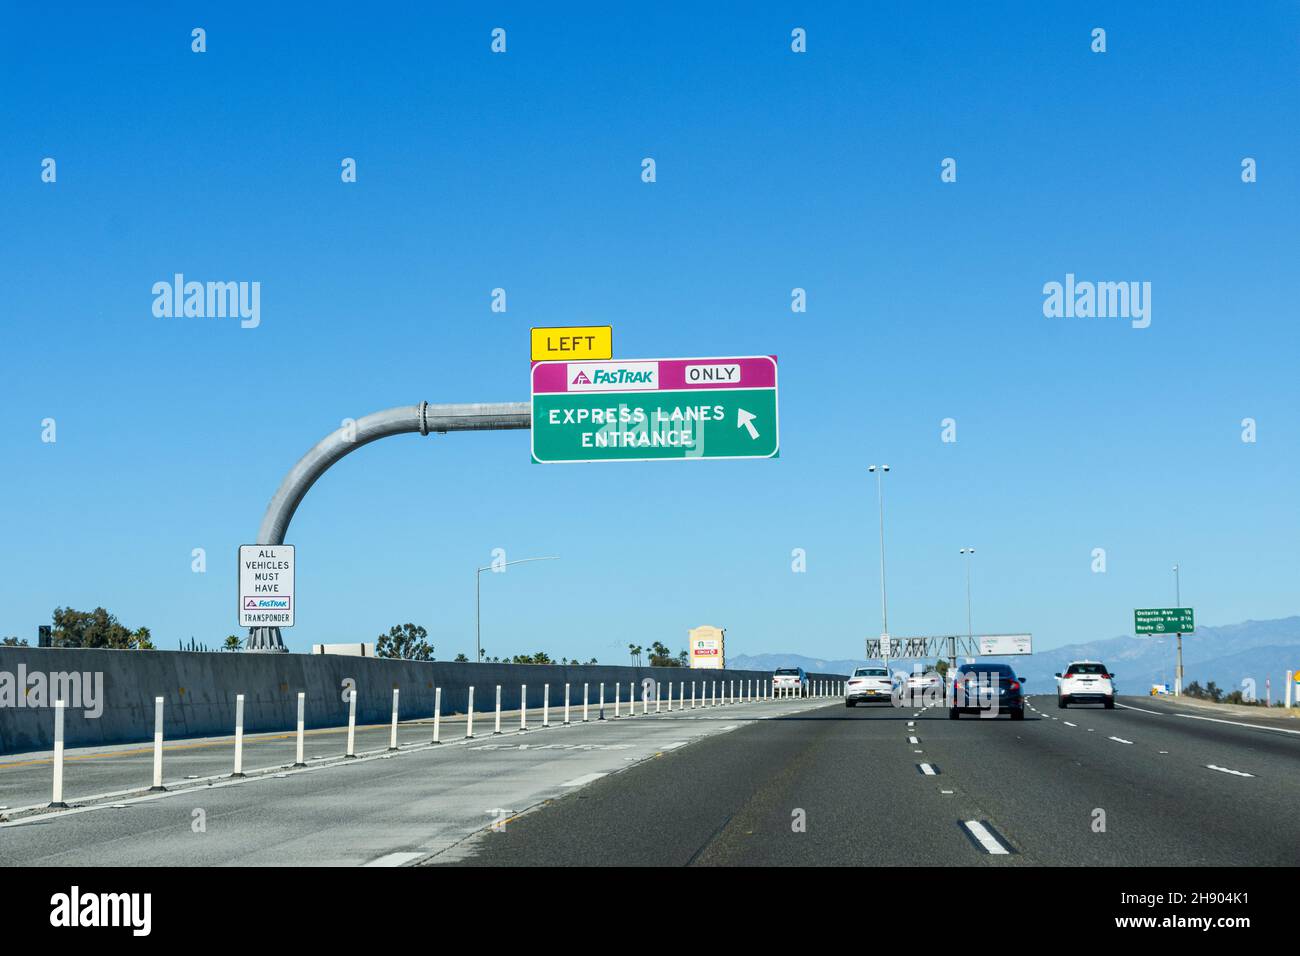 FasTrak Only road sign on the entrance to toll express lane on highway 15 - California, USA - 2021 Stock Photo